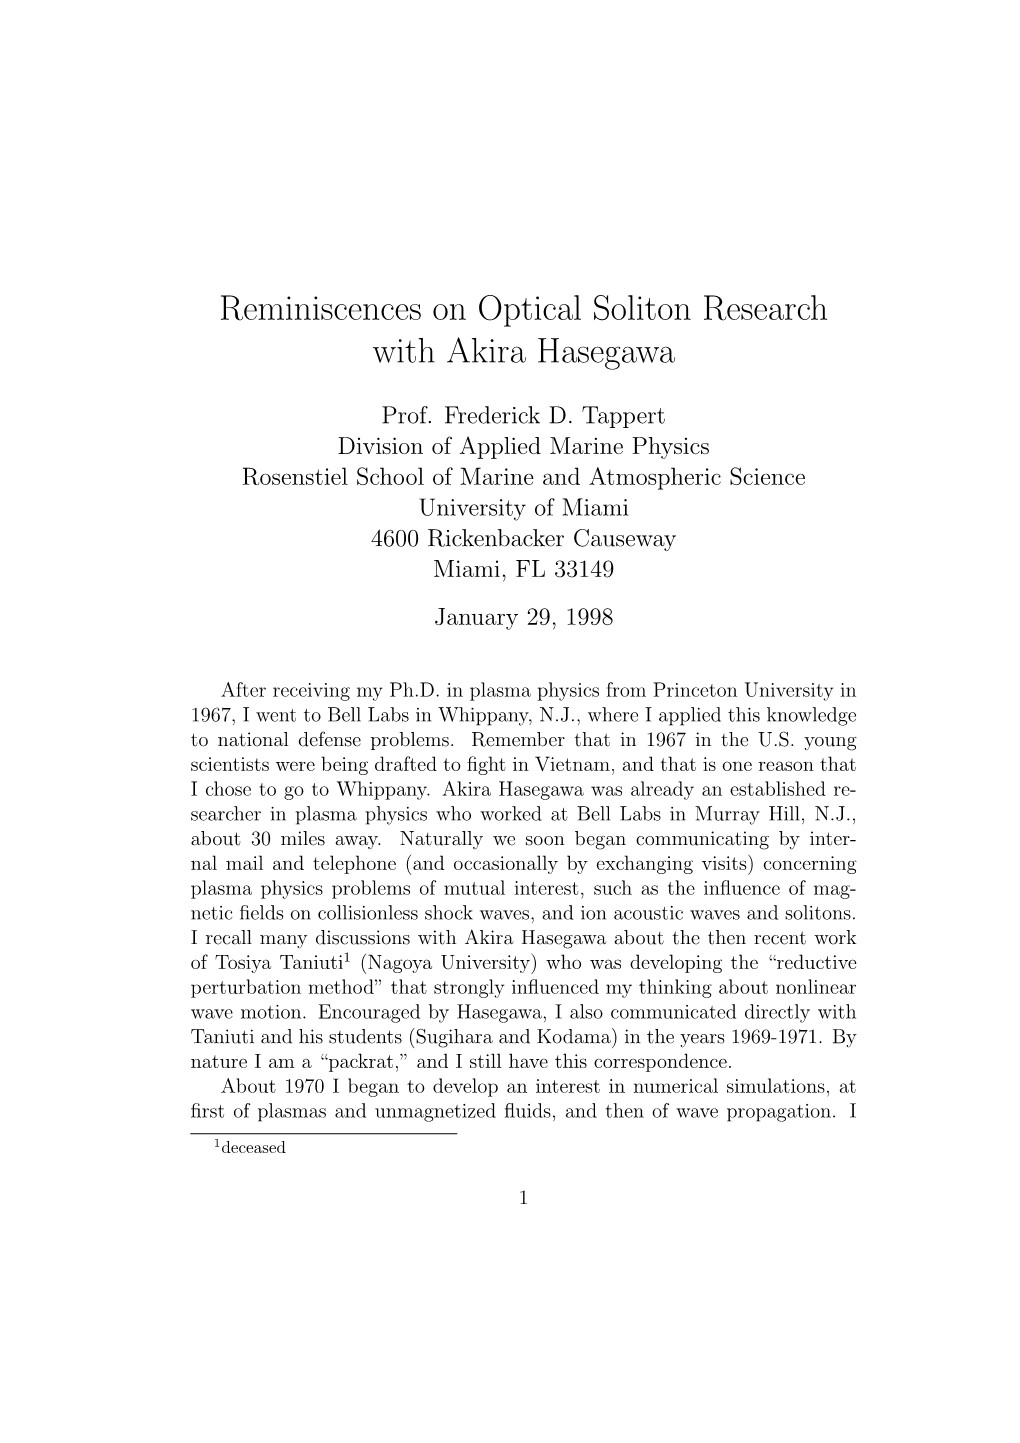 Reminiscences on Optical Soliton Research with Akira Hasegawa